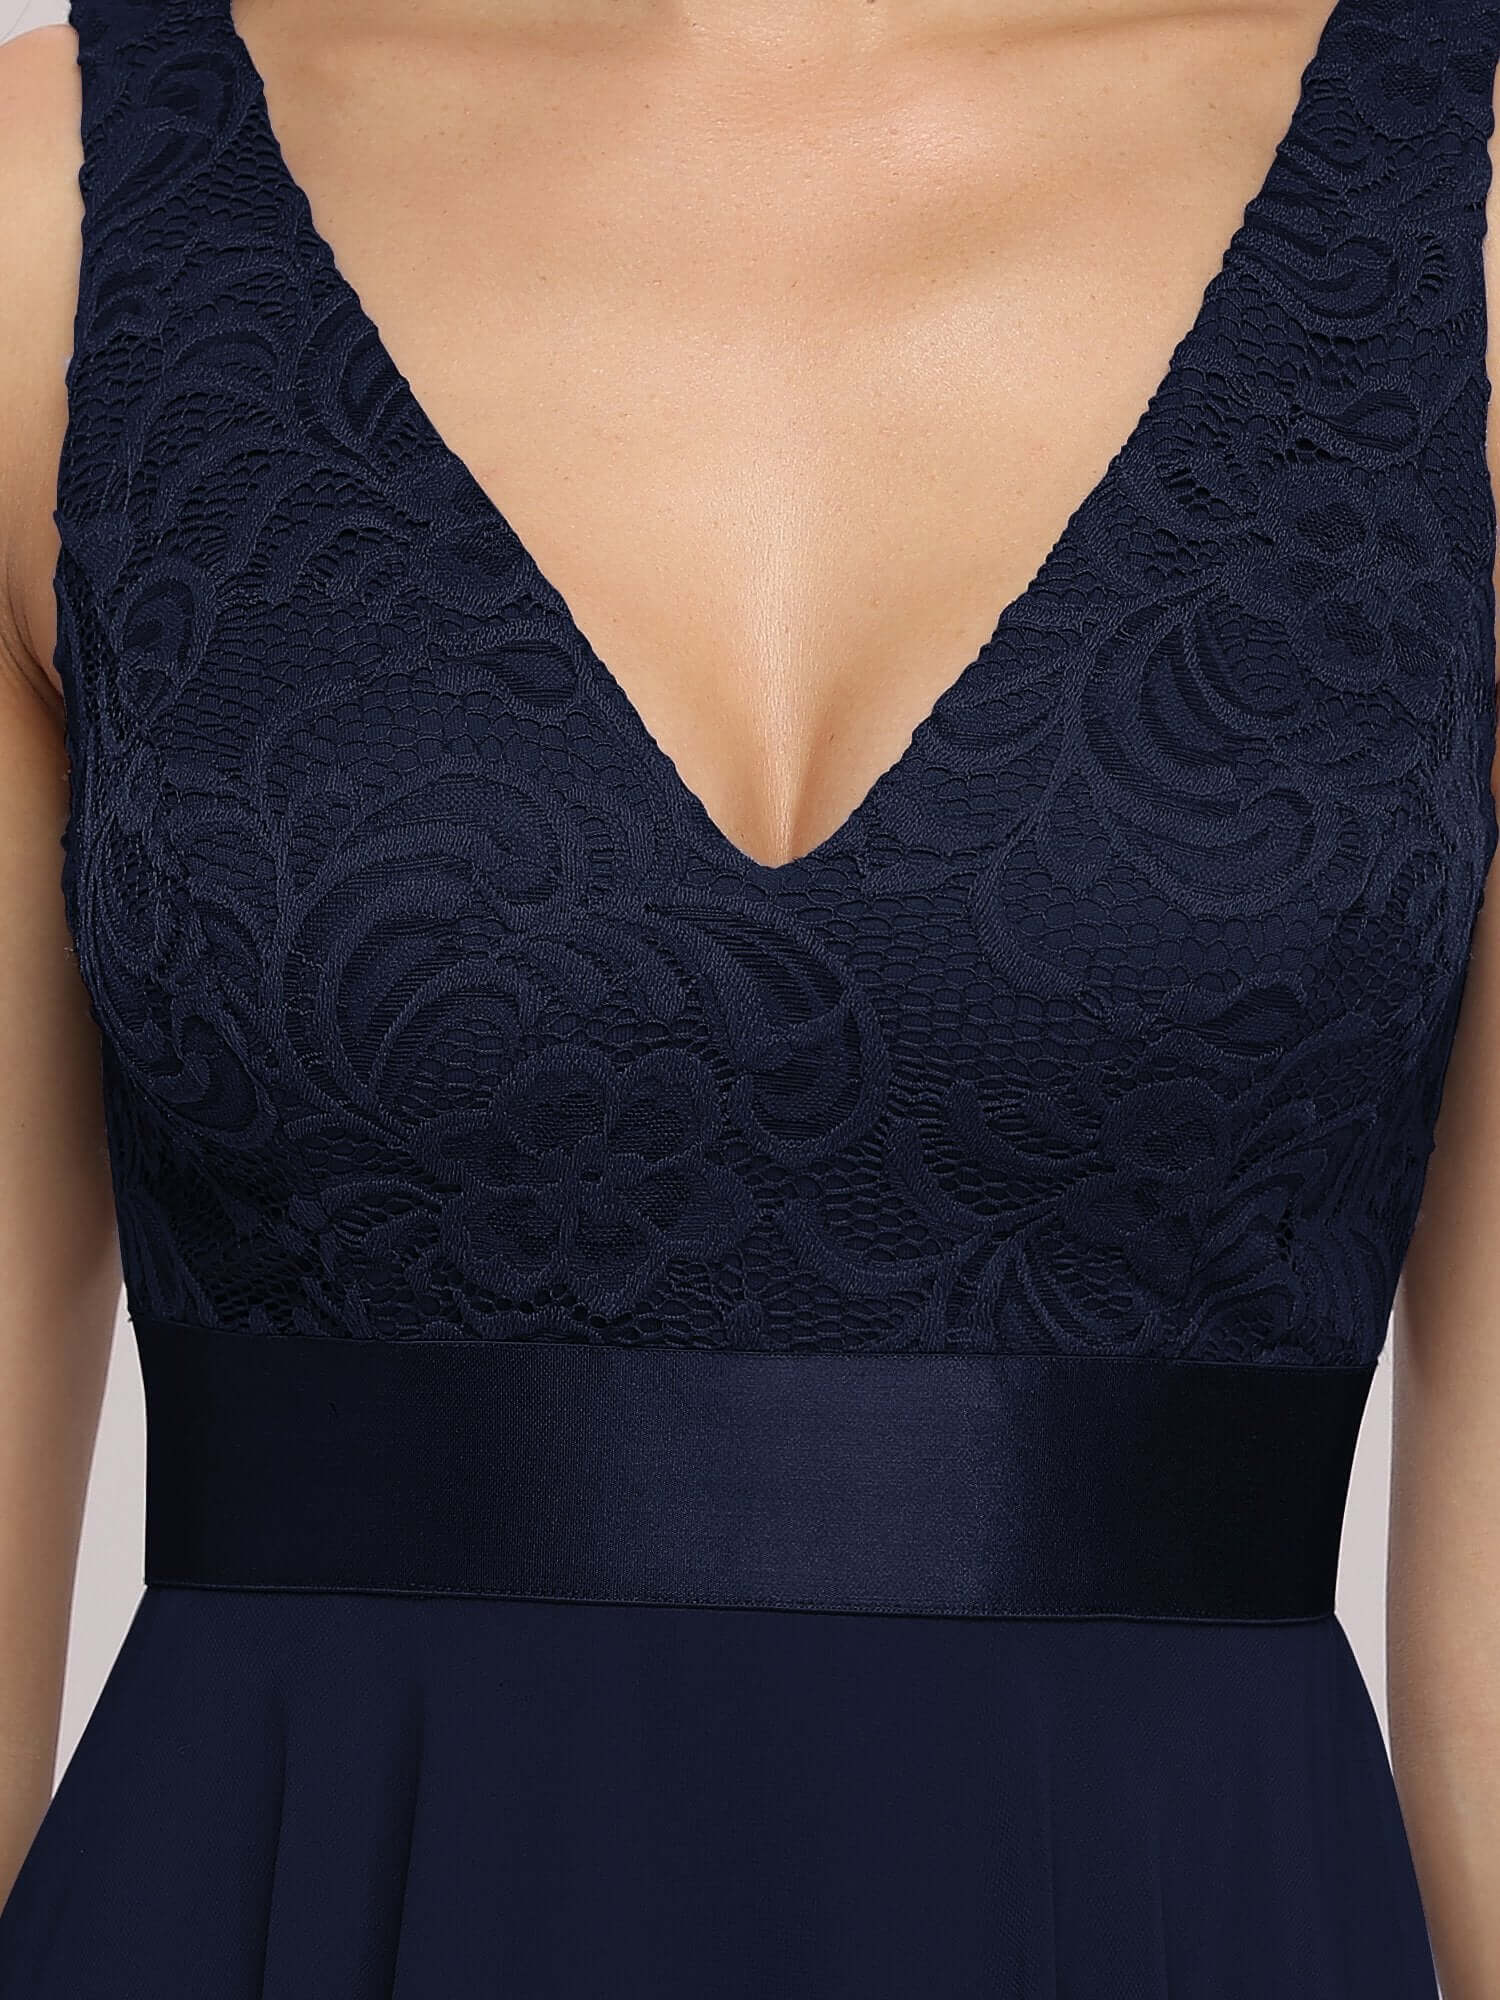 ey0207nb navy blue chiffon short evening gown with lace bodice eternally yours